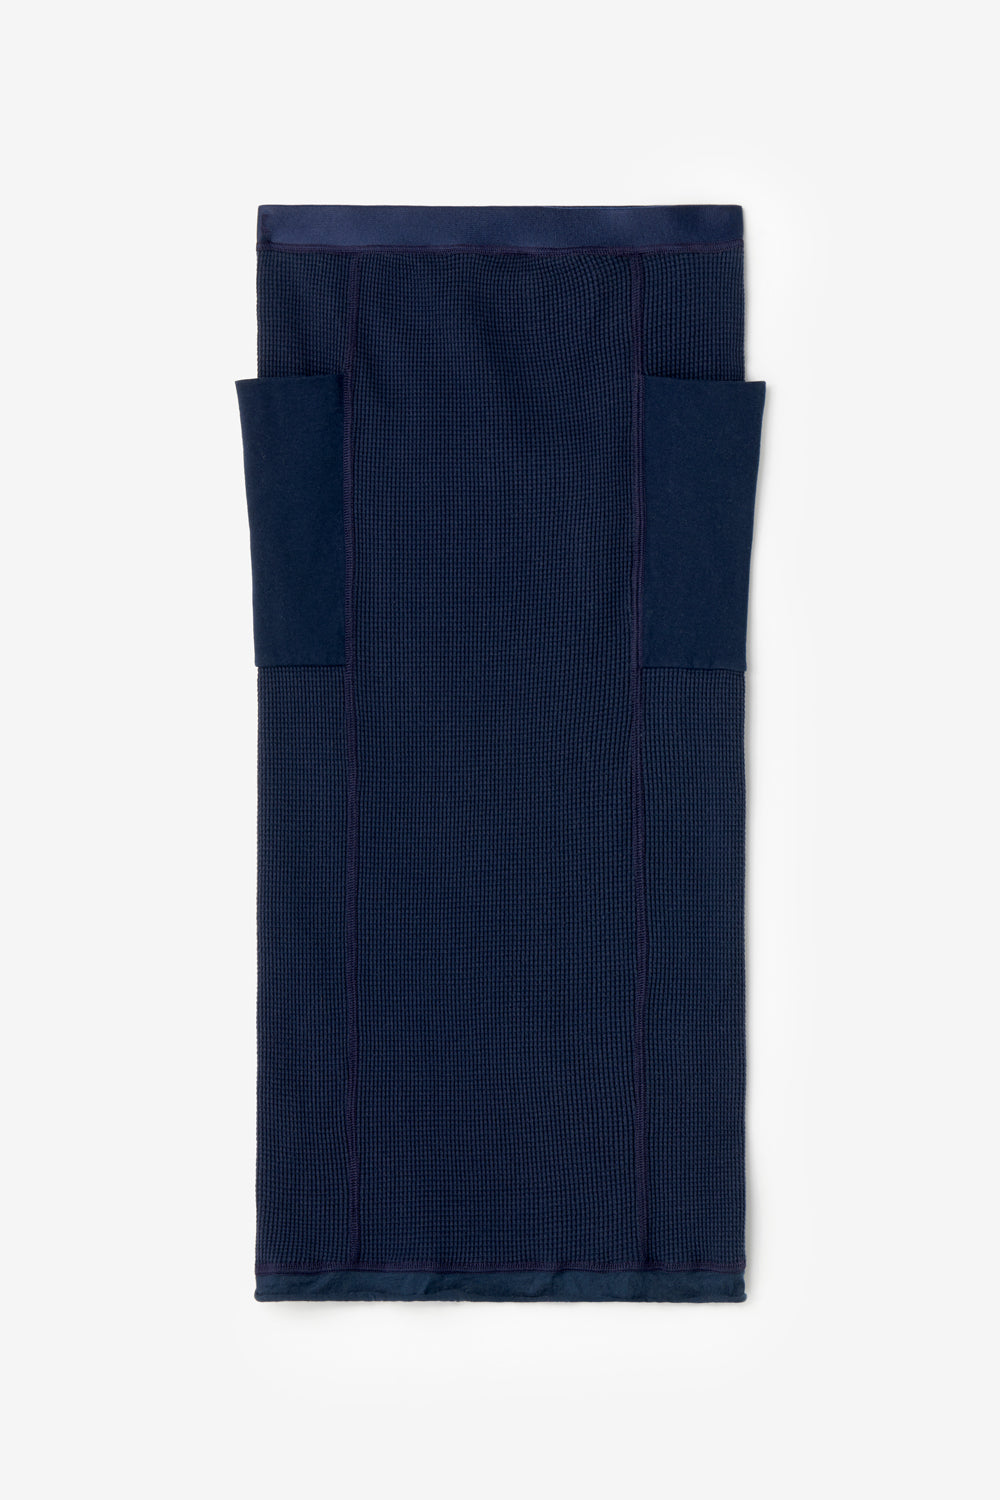 Alabama Chanin Chelsea Skirt with a waffle cargo-style in navy with pockets.